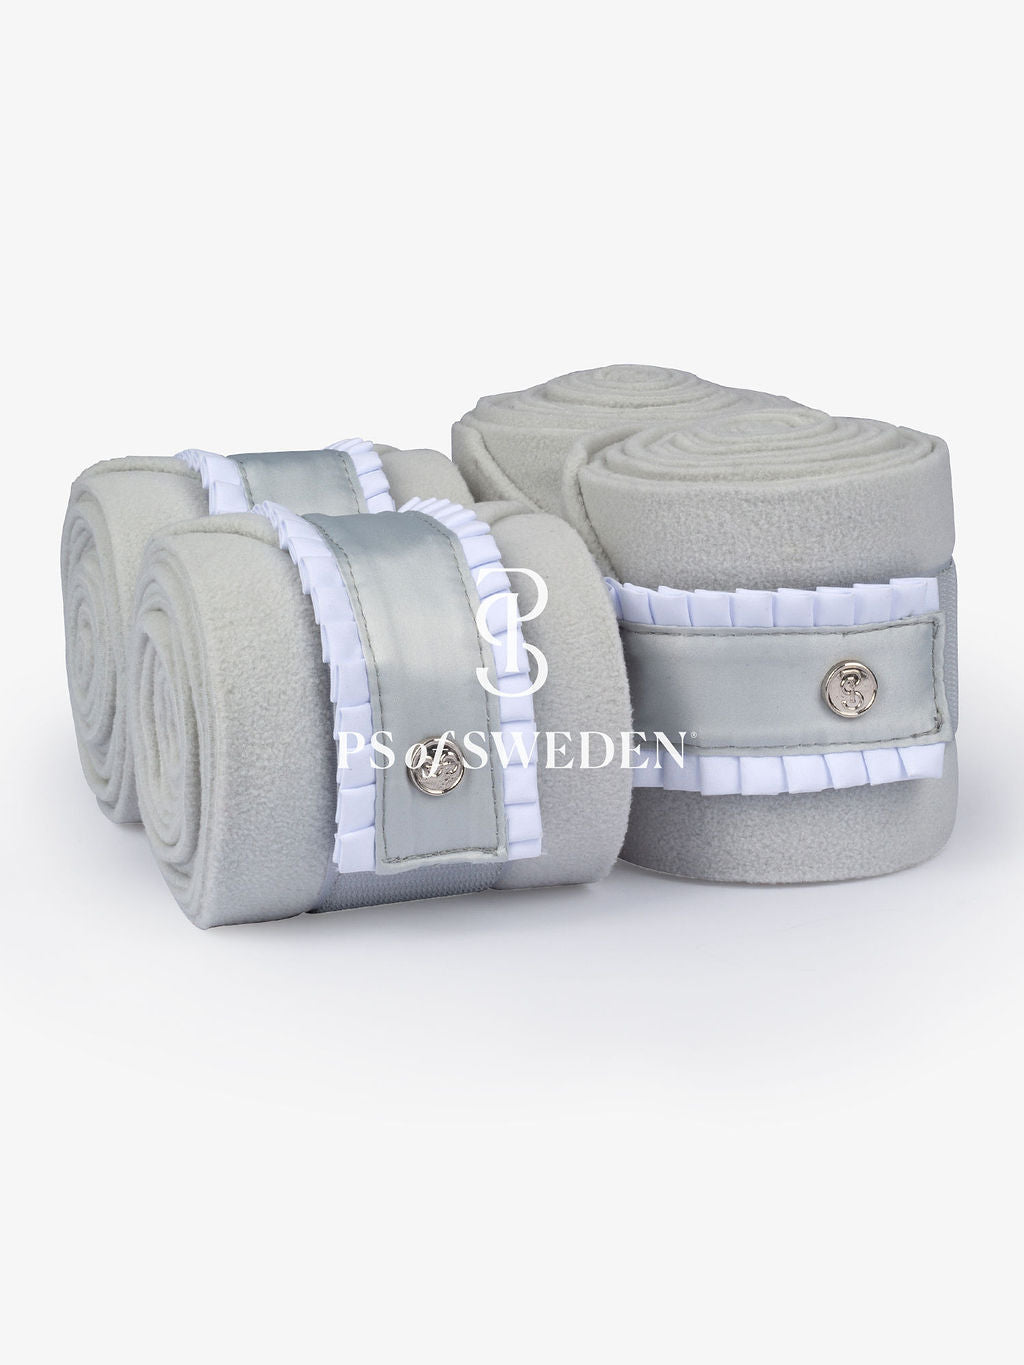 PS of Sweden - Ruffle Polo Bandages - Ice Grey